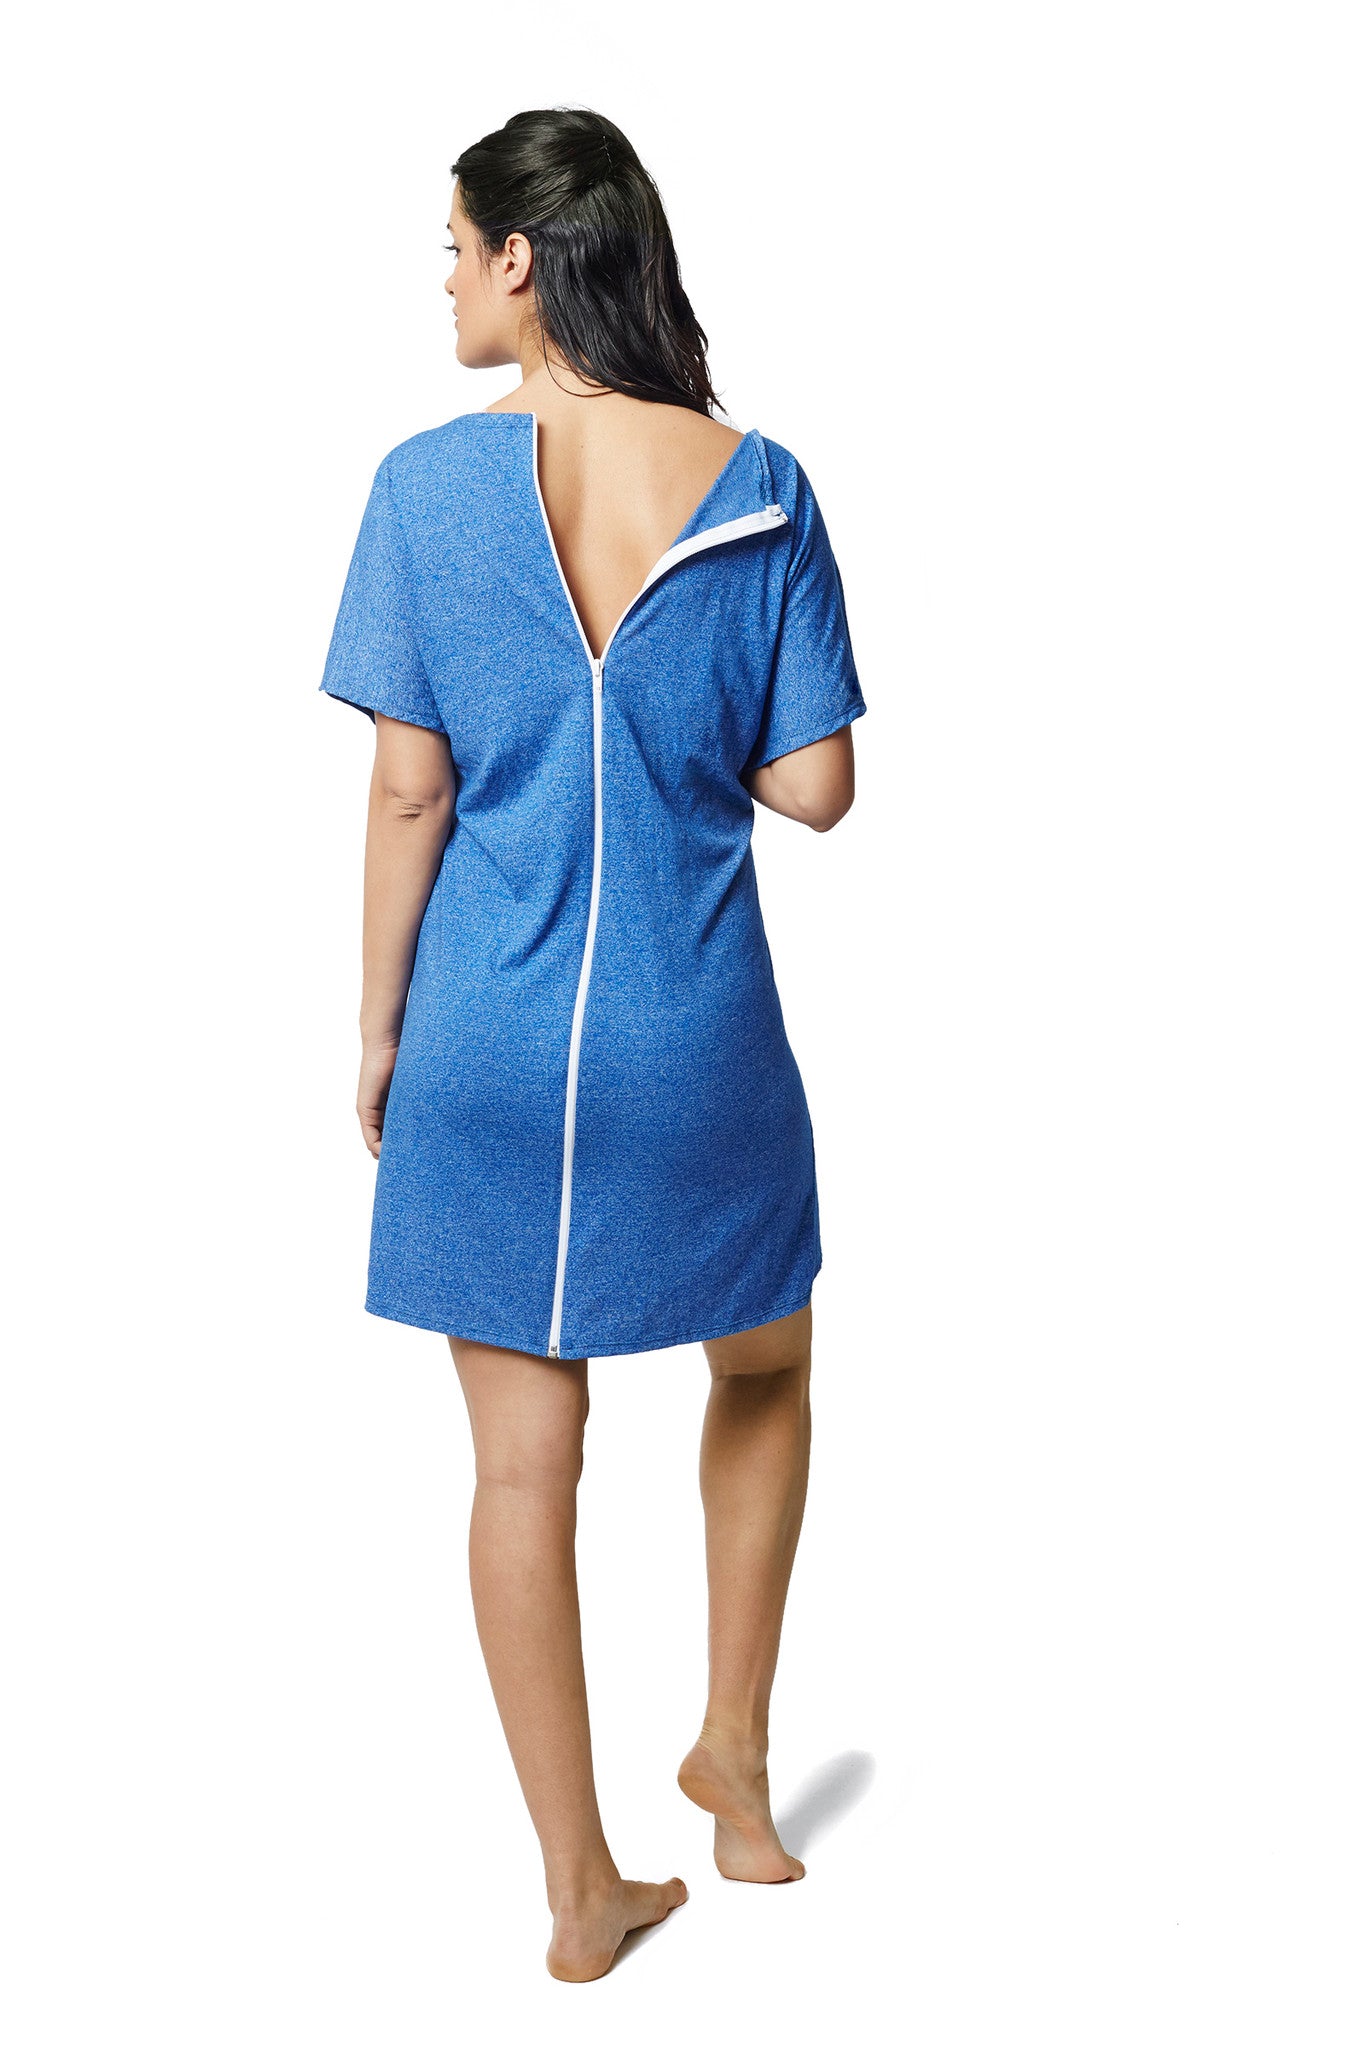 Hospital Gowns for labor and delivery by Pretty Pushers